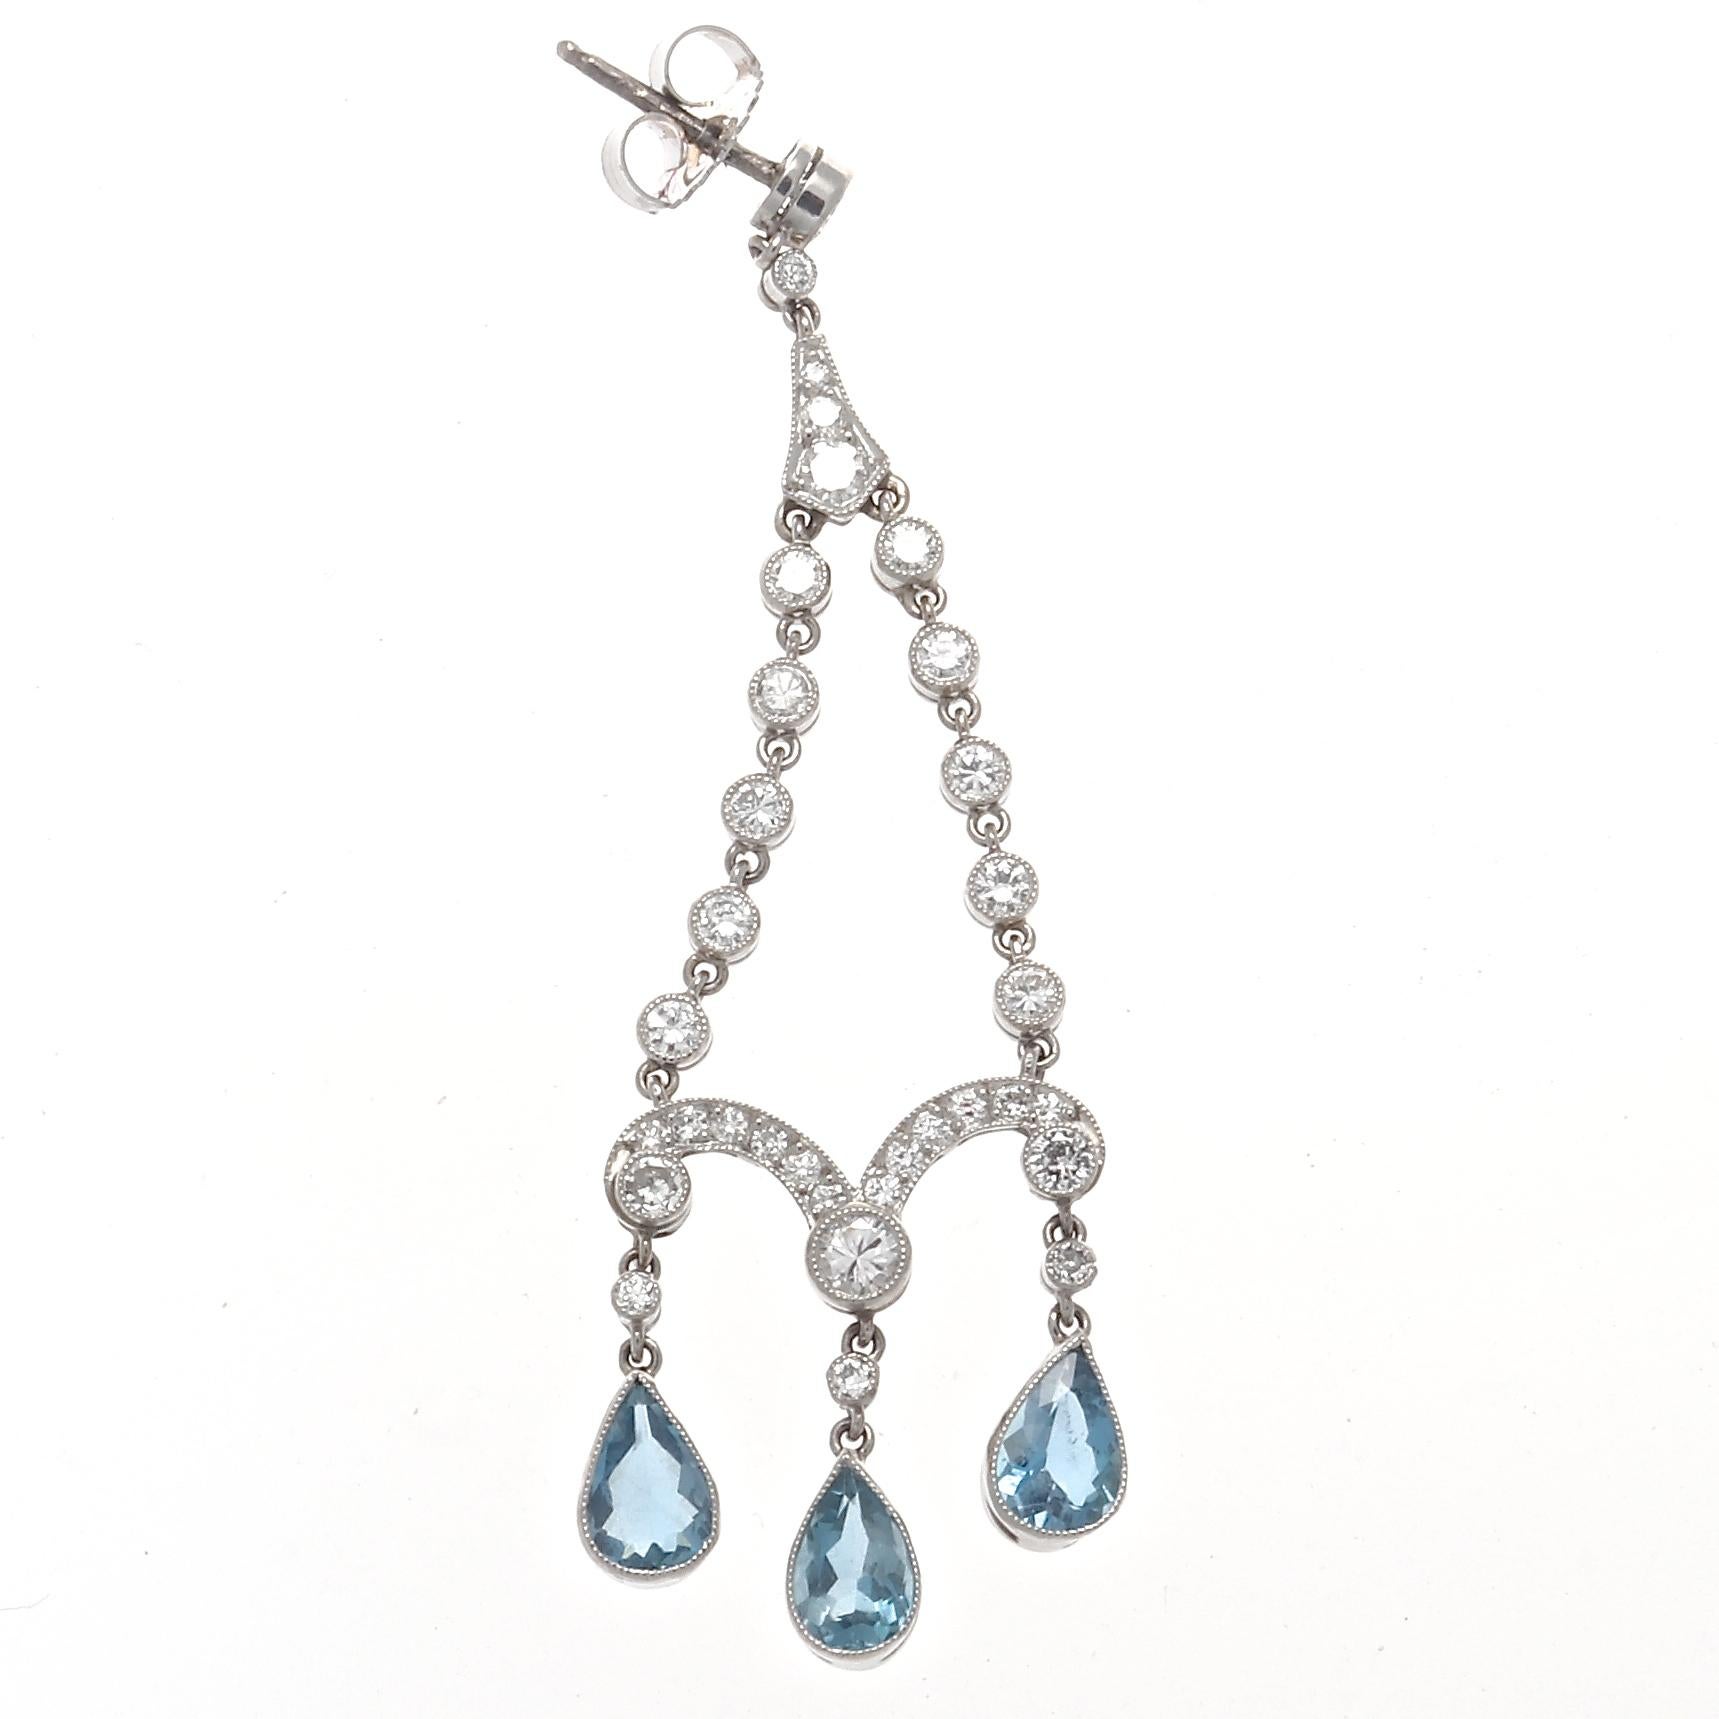 Elegant bliss, bringing the golden era of jewelry to life. Featuring chandeliers of aquamarine and diamonds. Crafted in platinum. 2-1/4 inches long.